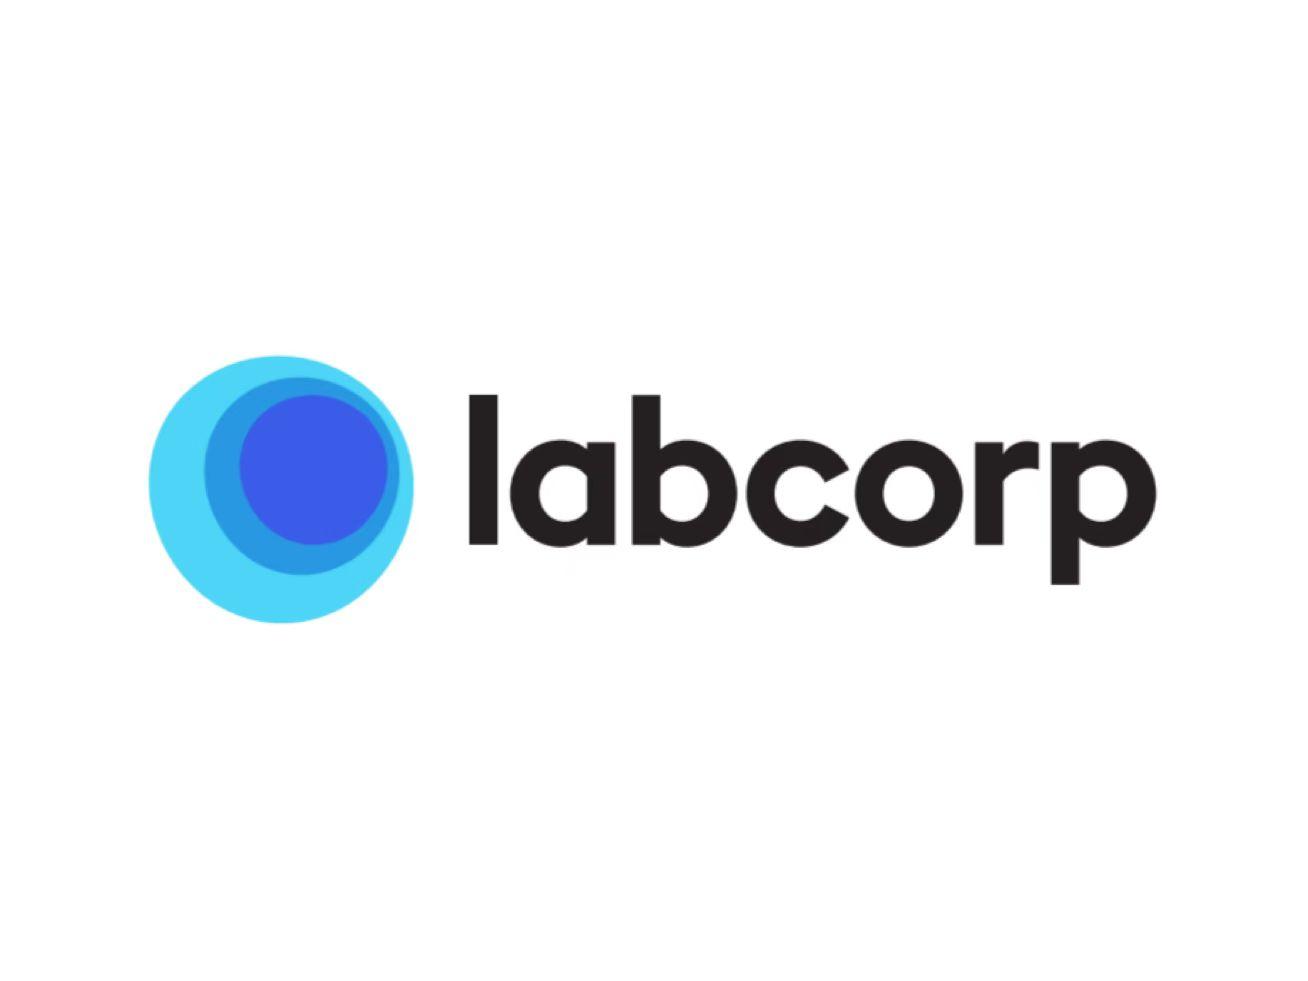  Labcorp Q2 Revenues Grow 4 Percent Driven by Spike in Base Business